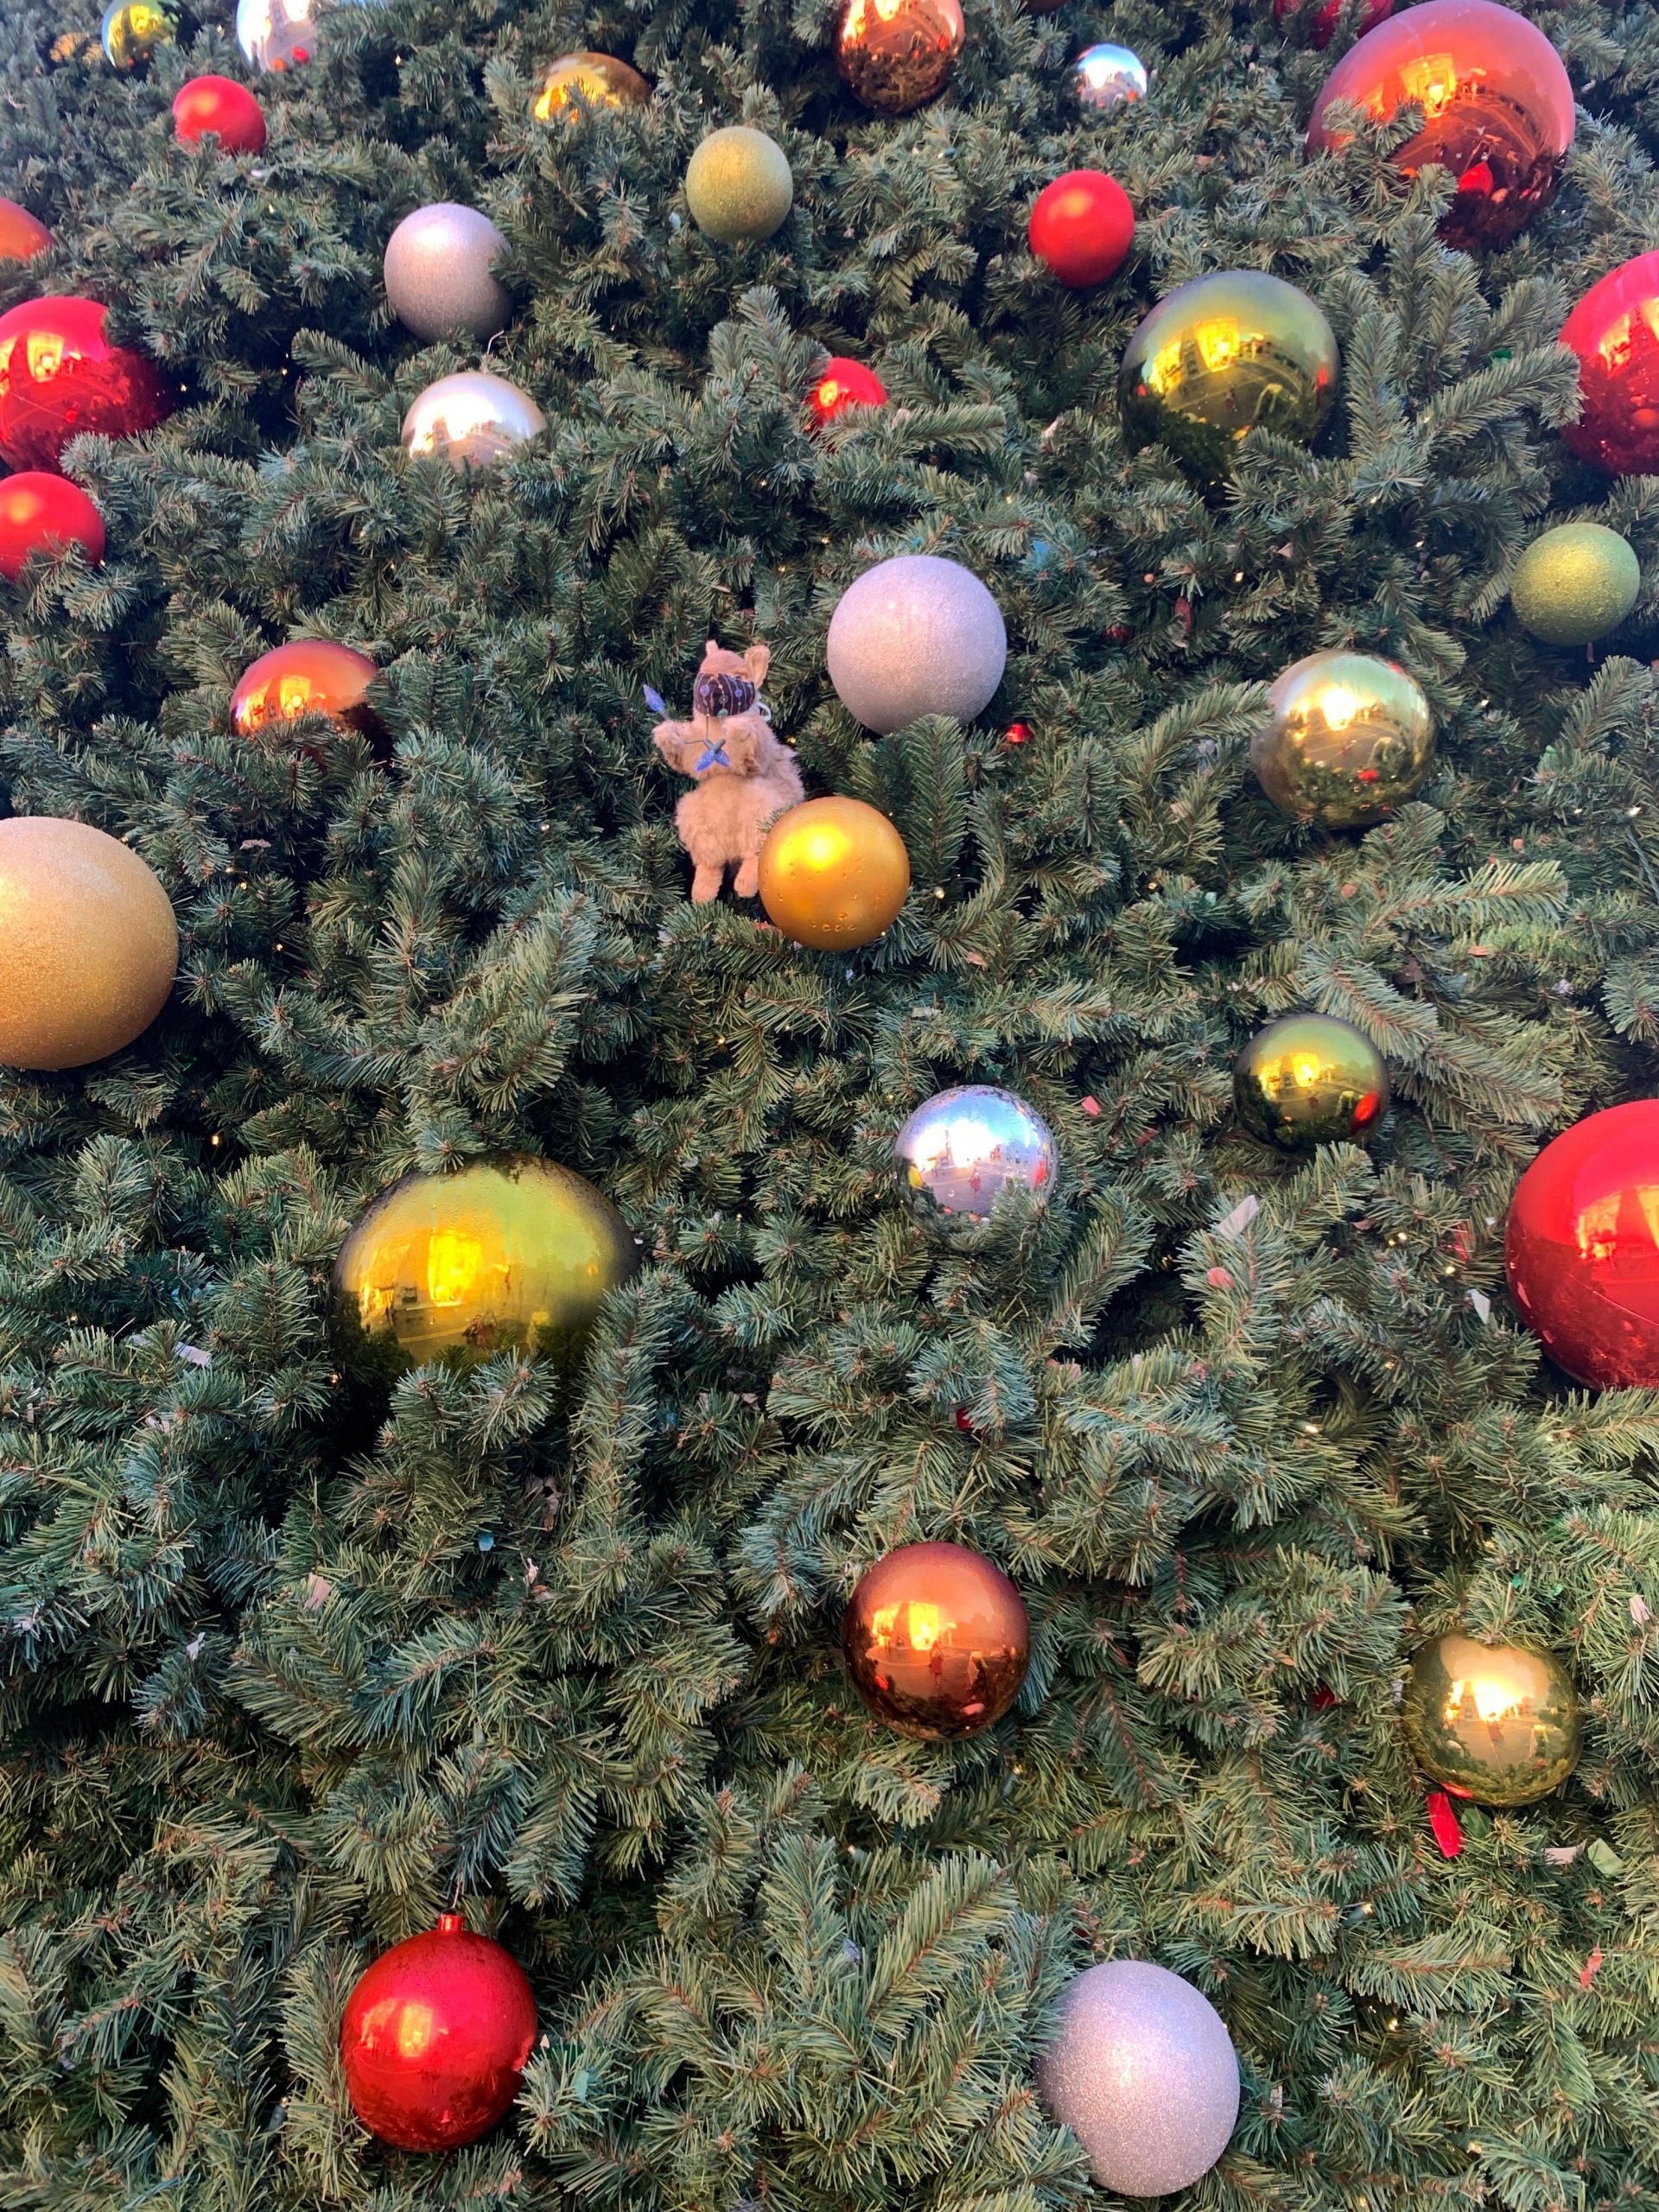 Earl the Squirrel among a bunch of ornaments on a tree.